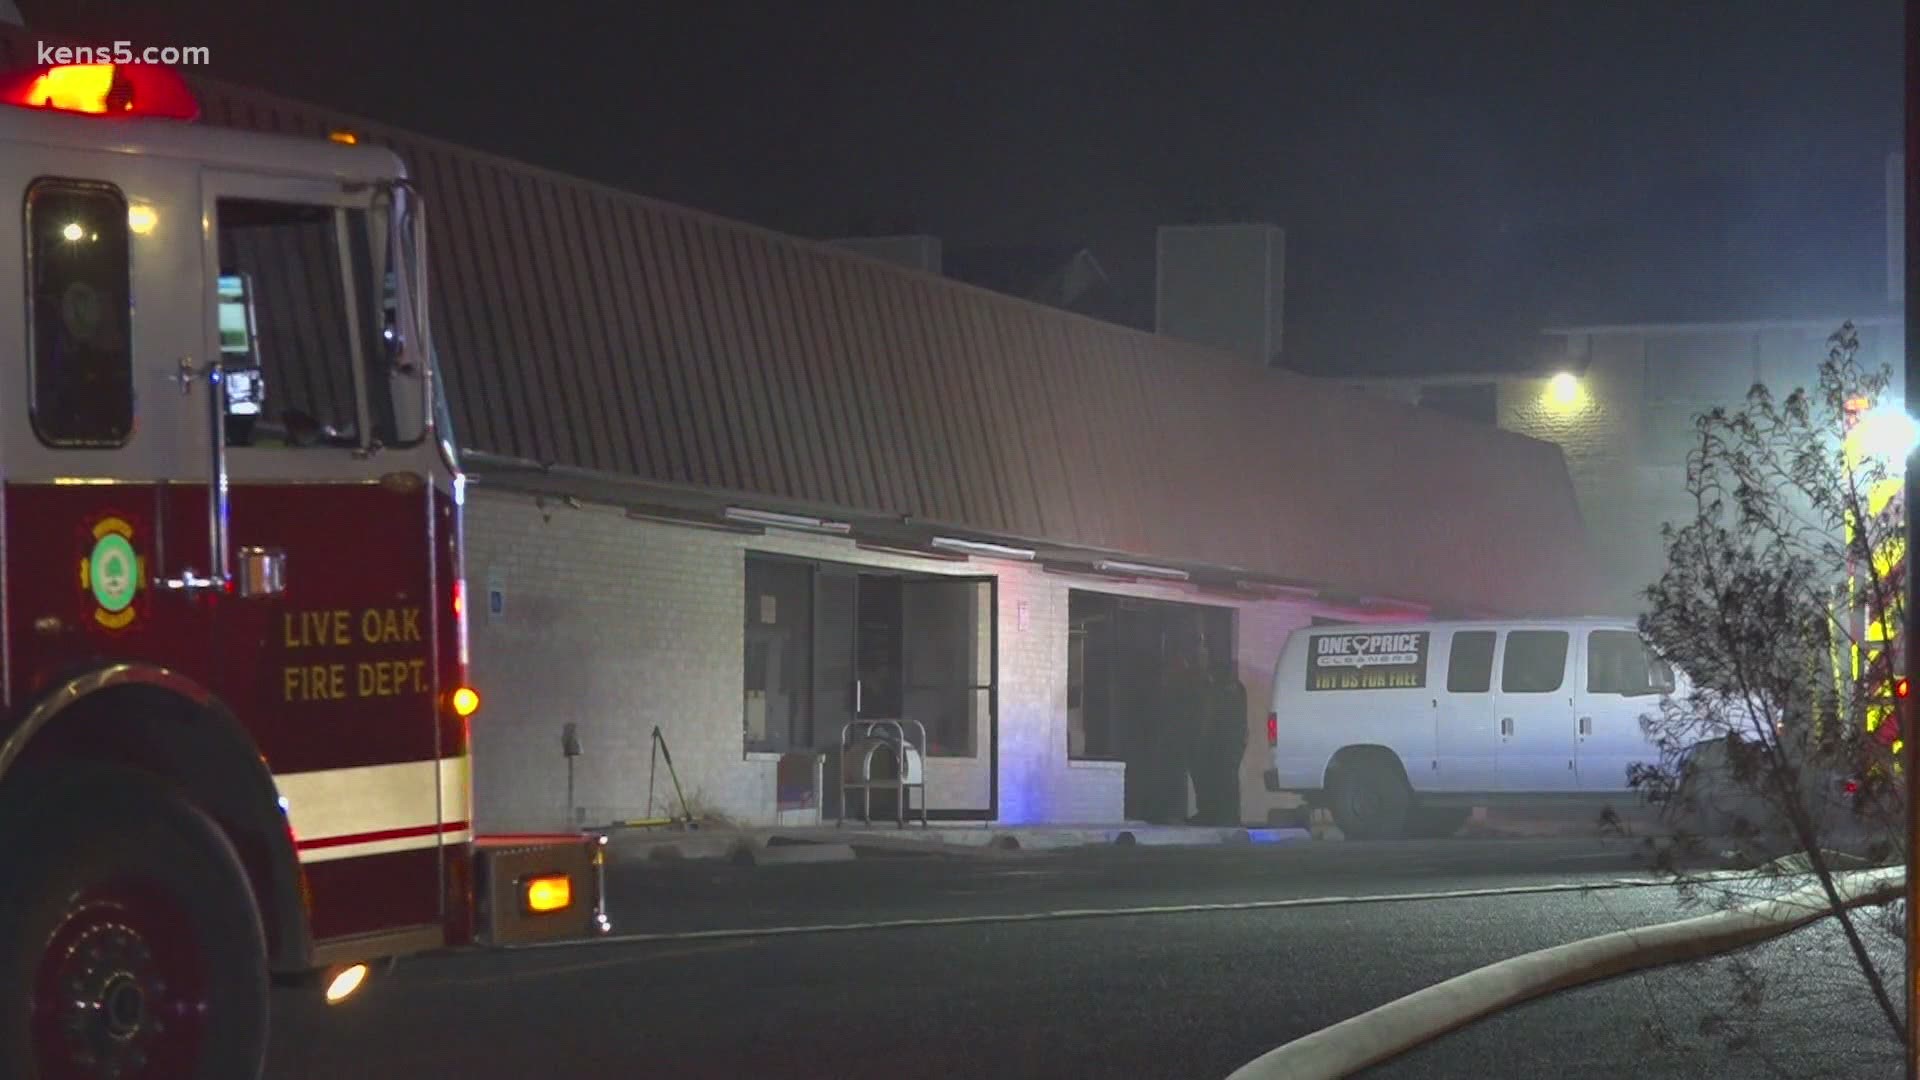 A fire at a dry cleaning business is being called "suspicious" by Universal City authorities.